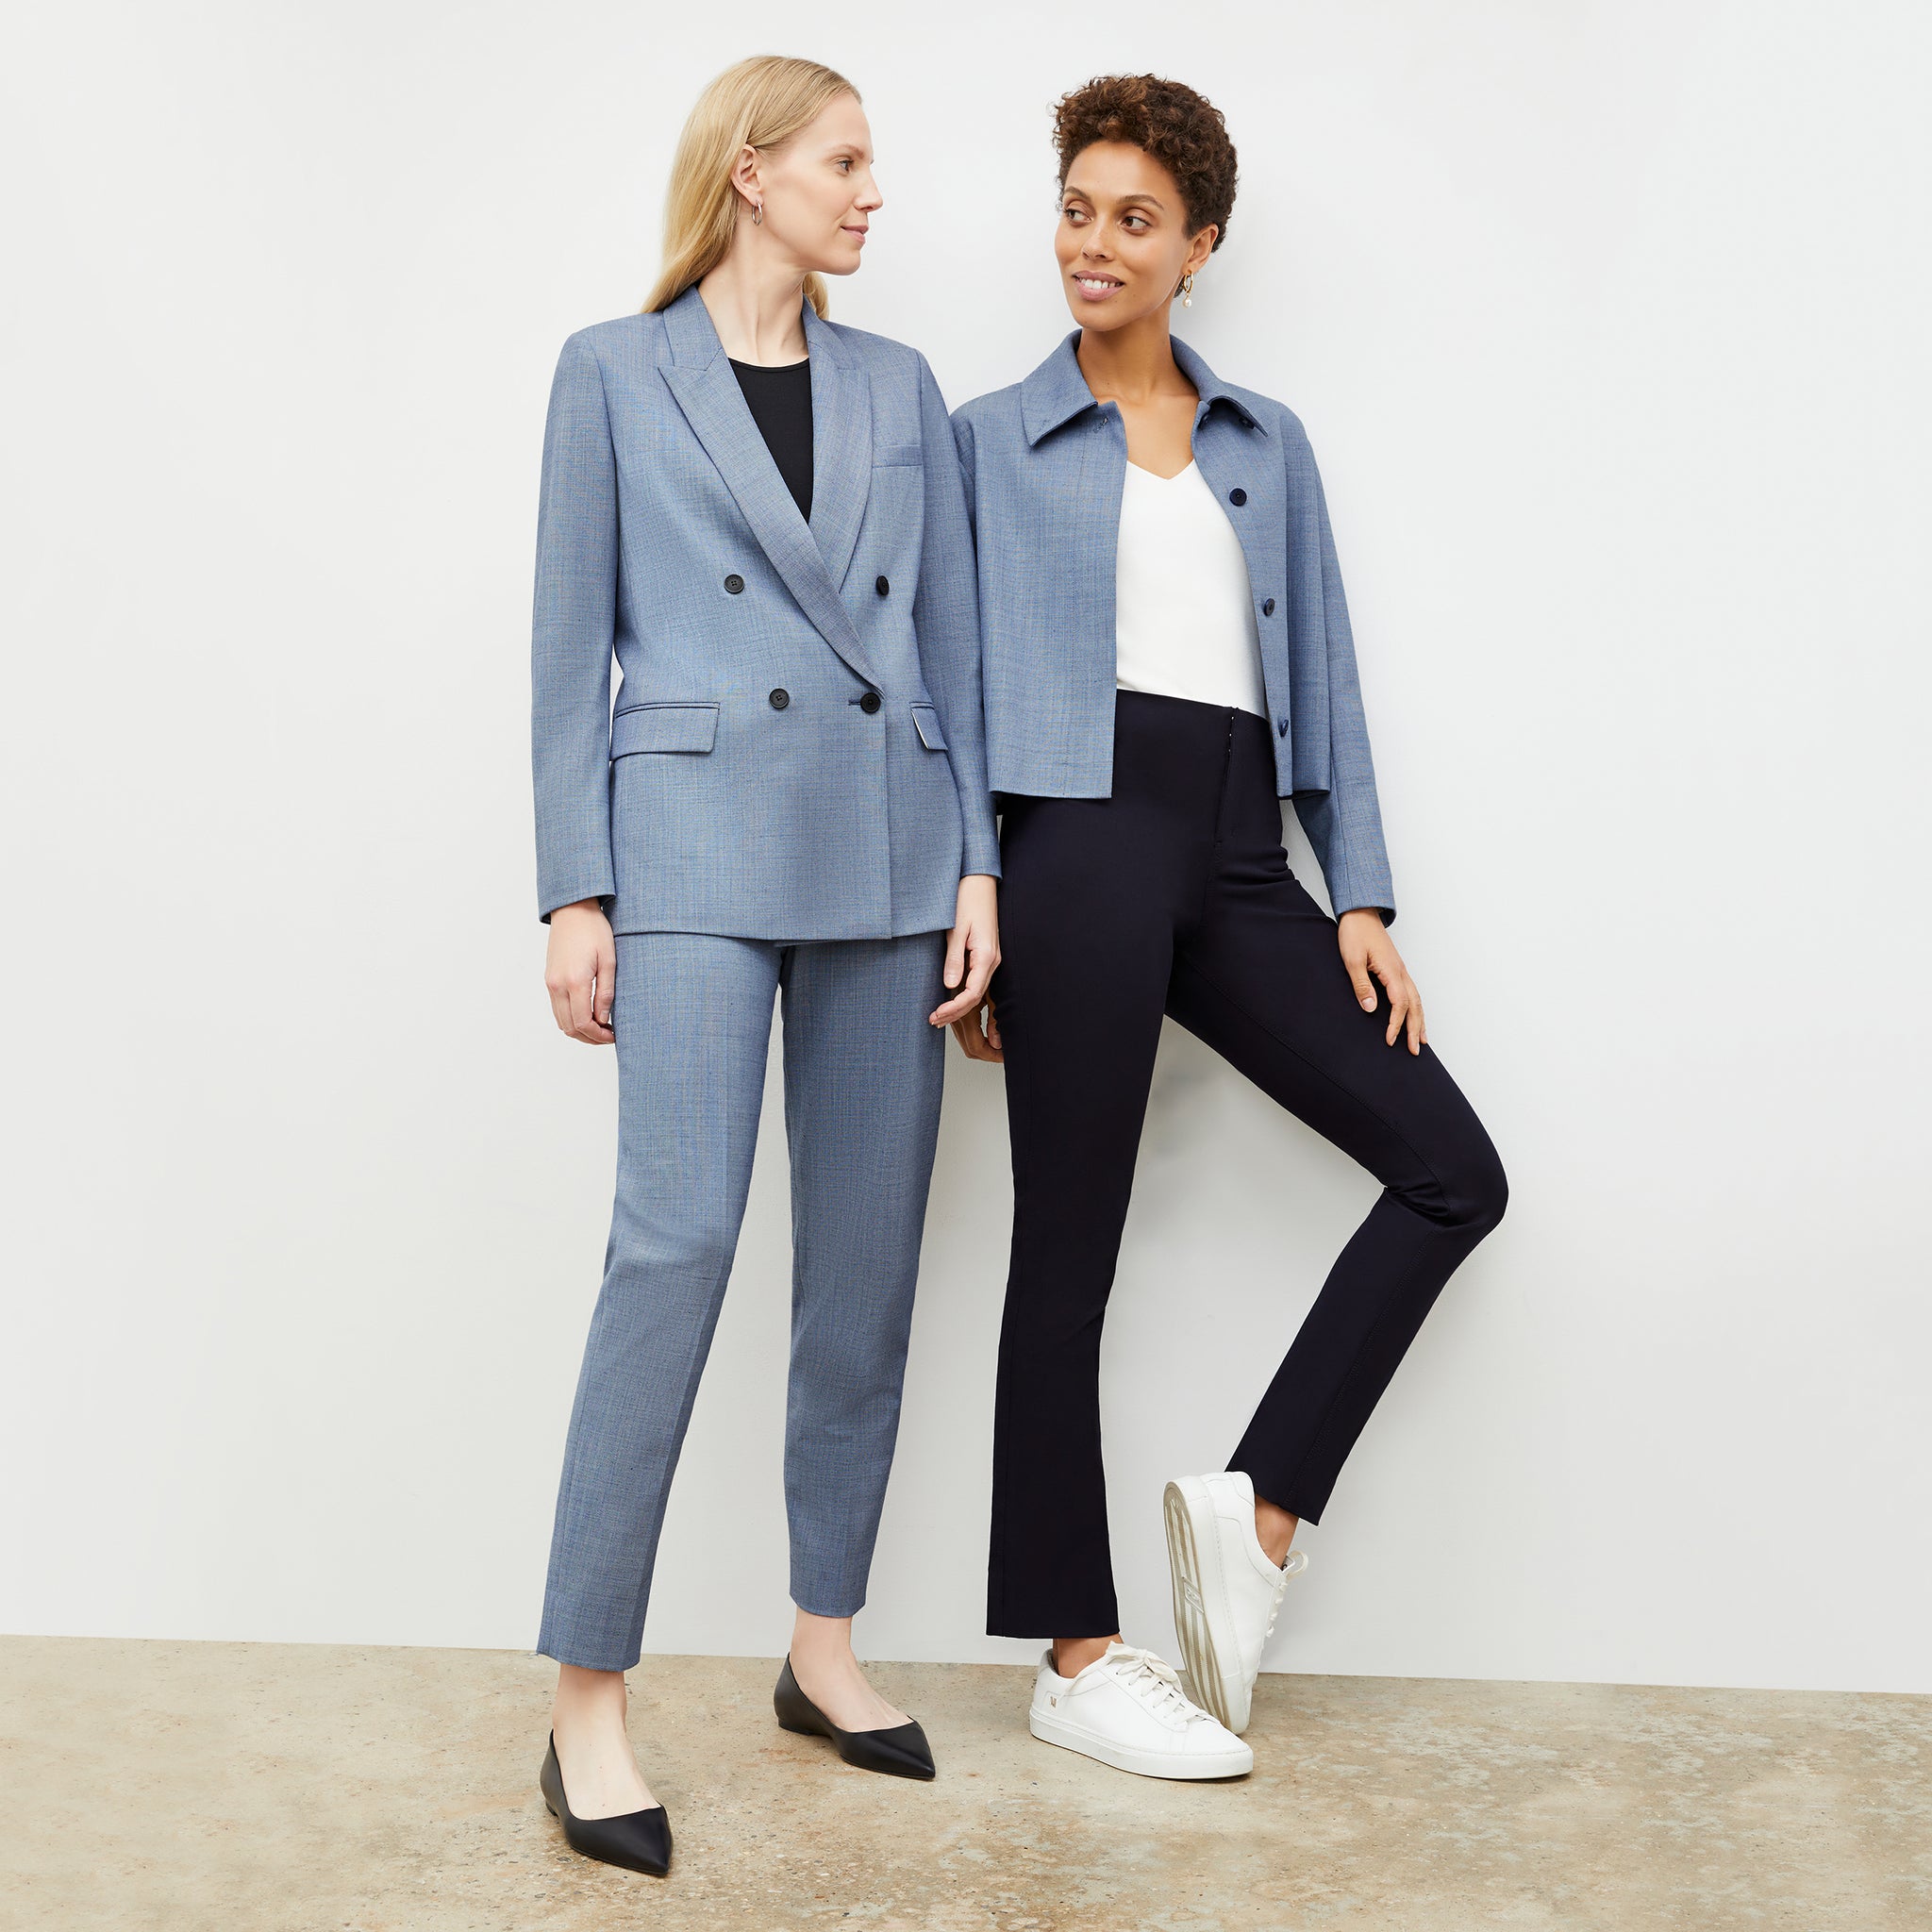 Front image of a woman wearing the ohara blazer in indigo and white and woman wearing the nicky jacket in indigo and white